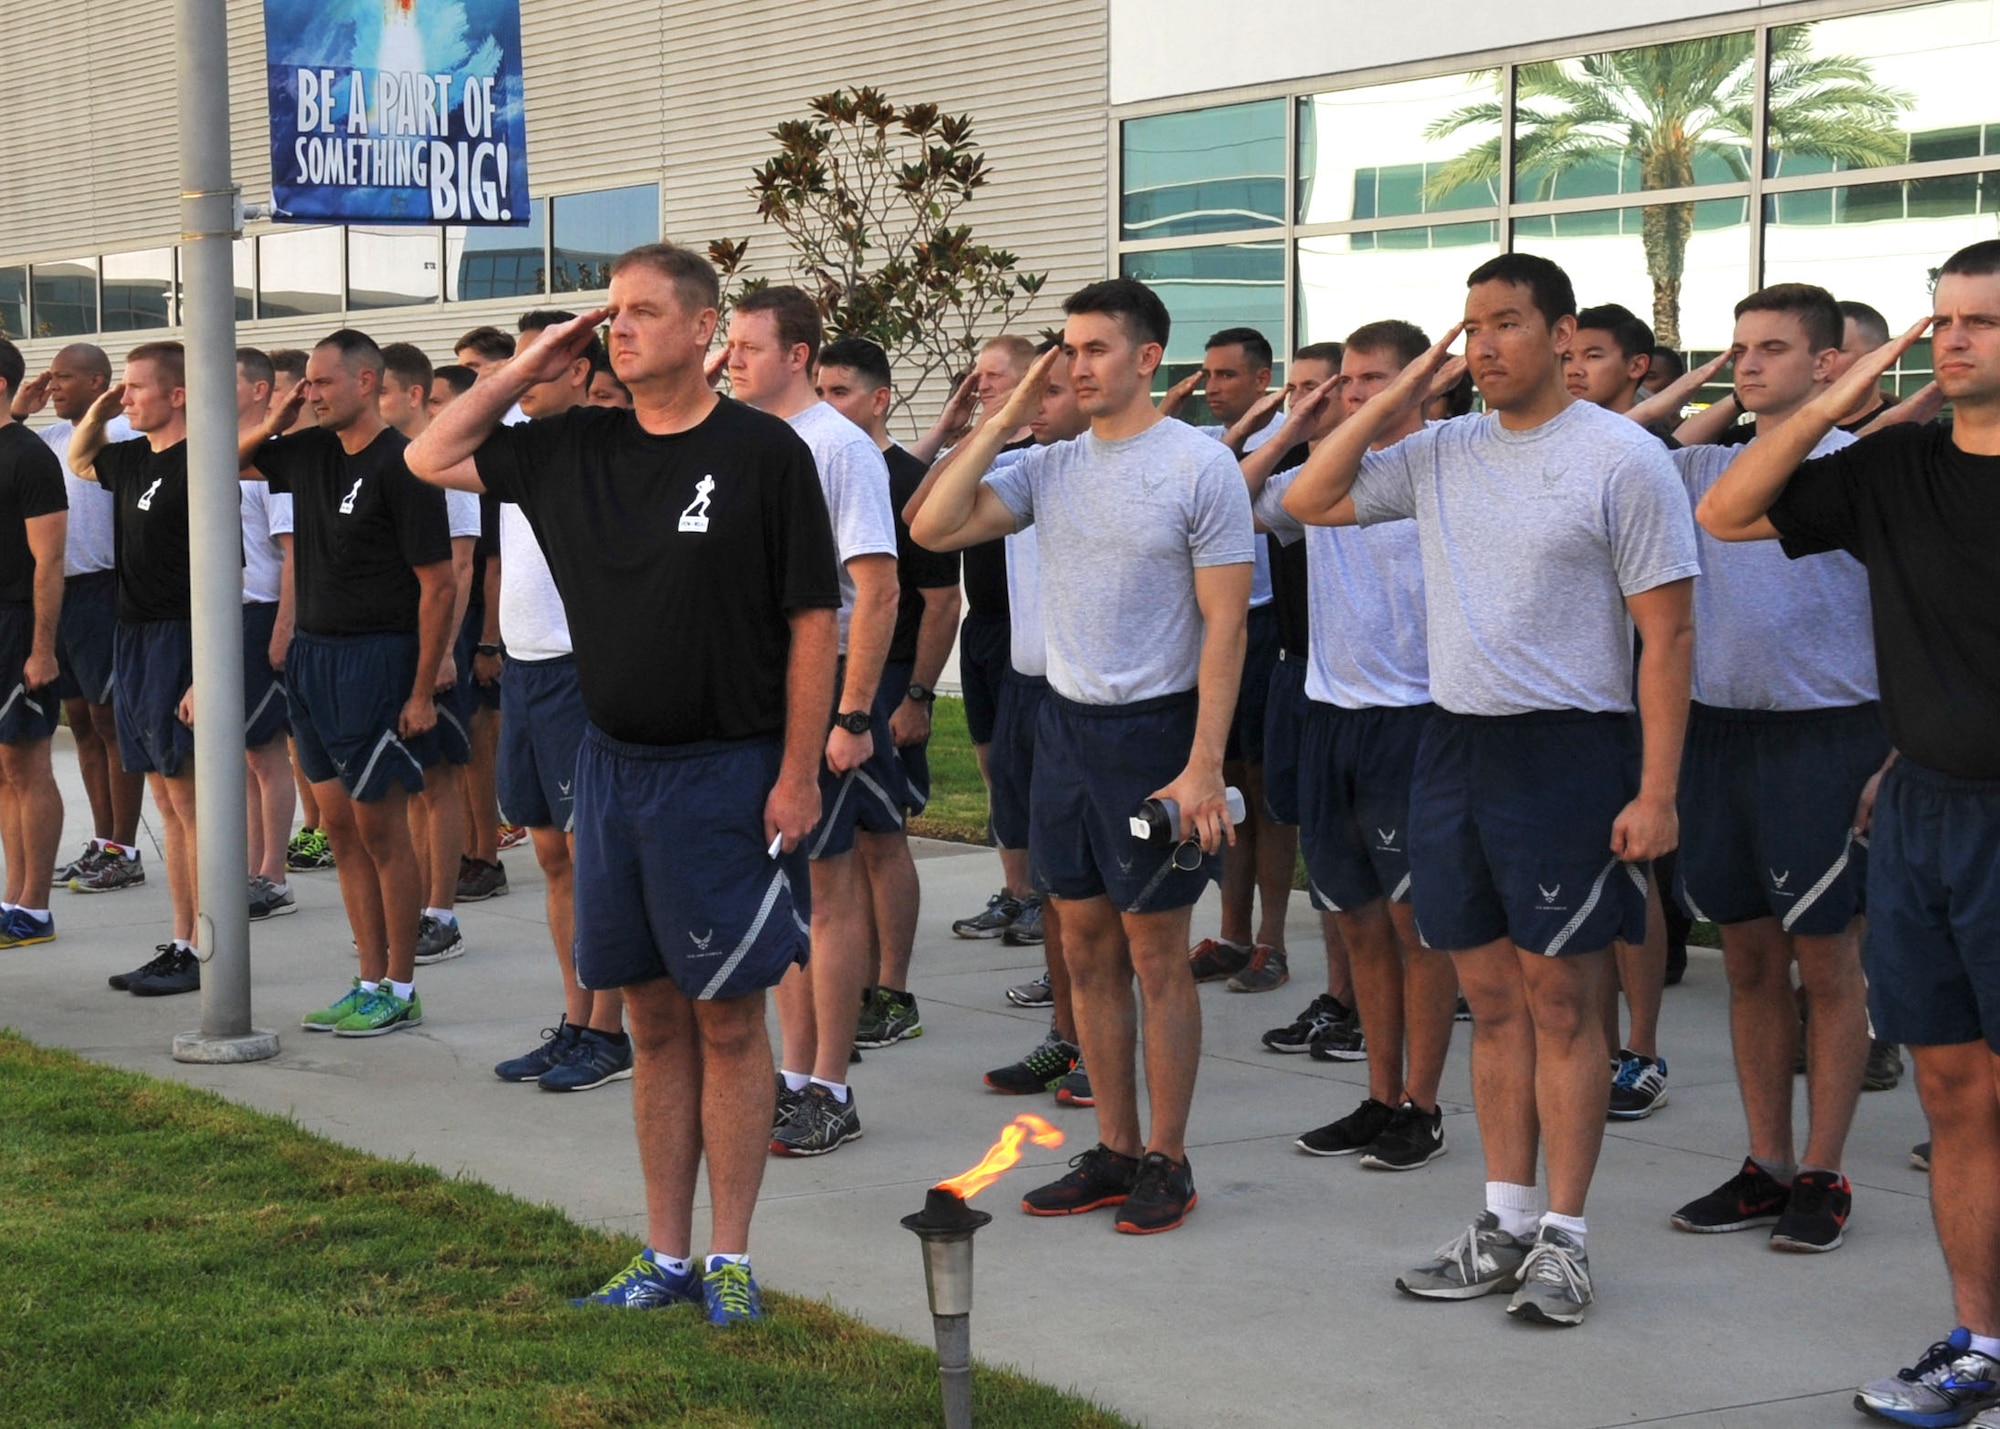 The POW/MIA torch relay team renders honors during the National Anthem at the start of the National POW/MIA Recognition Day ceremony at the Space and Missile Systems Center's Schriever Space Complex flagpole at Los Angeles Air Force Base in El Segundo, Calif. (U.S. Air Force photo/Sarah Corrice)